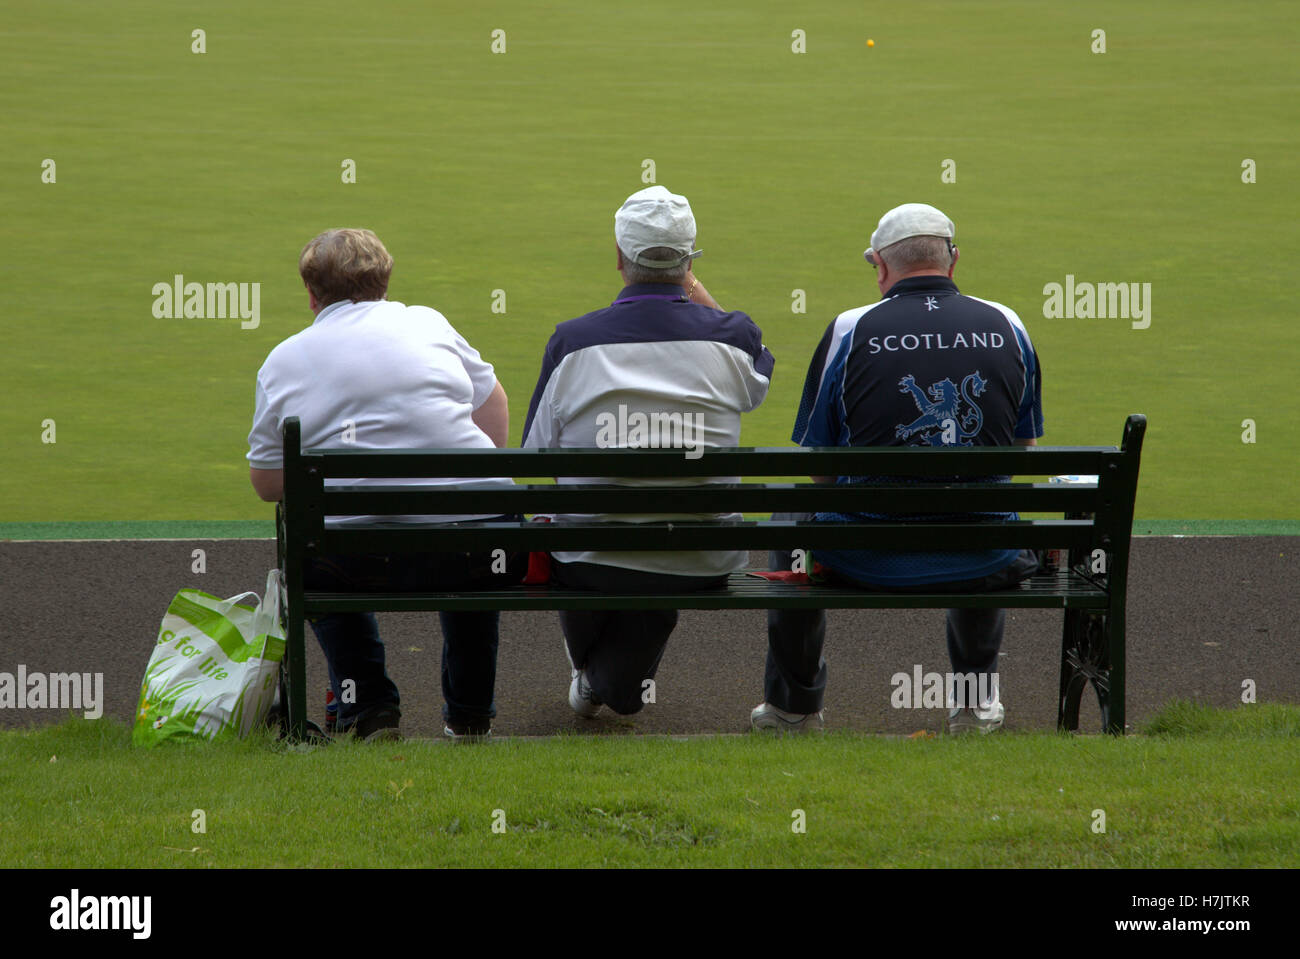 three men sitting on a bench with large Scotland logo jacket lawn background Stock Photo